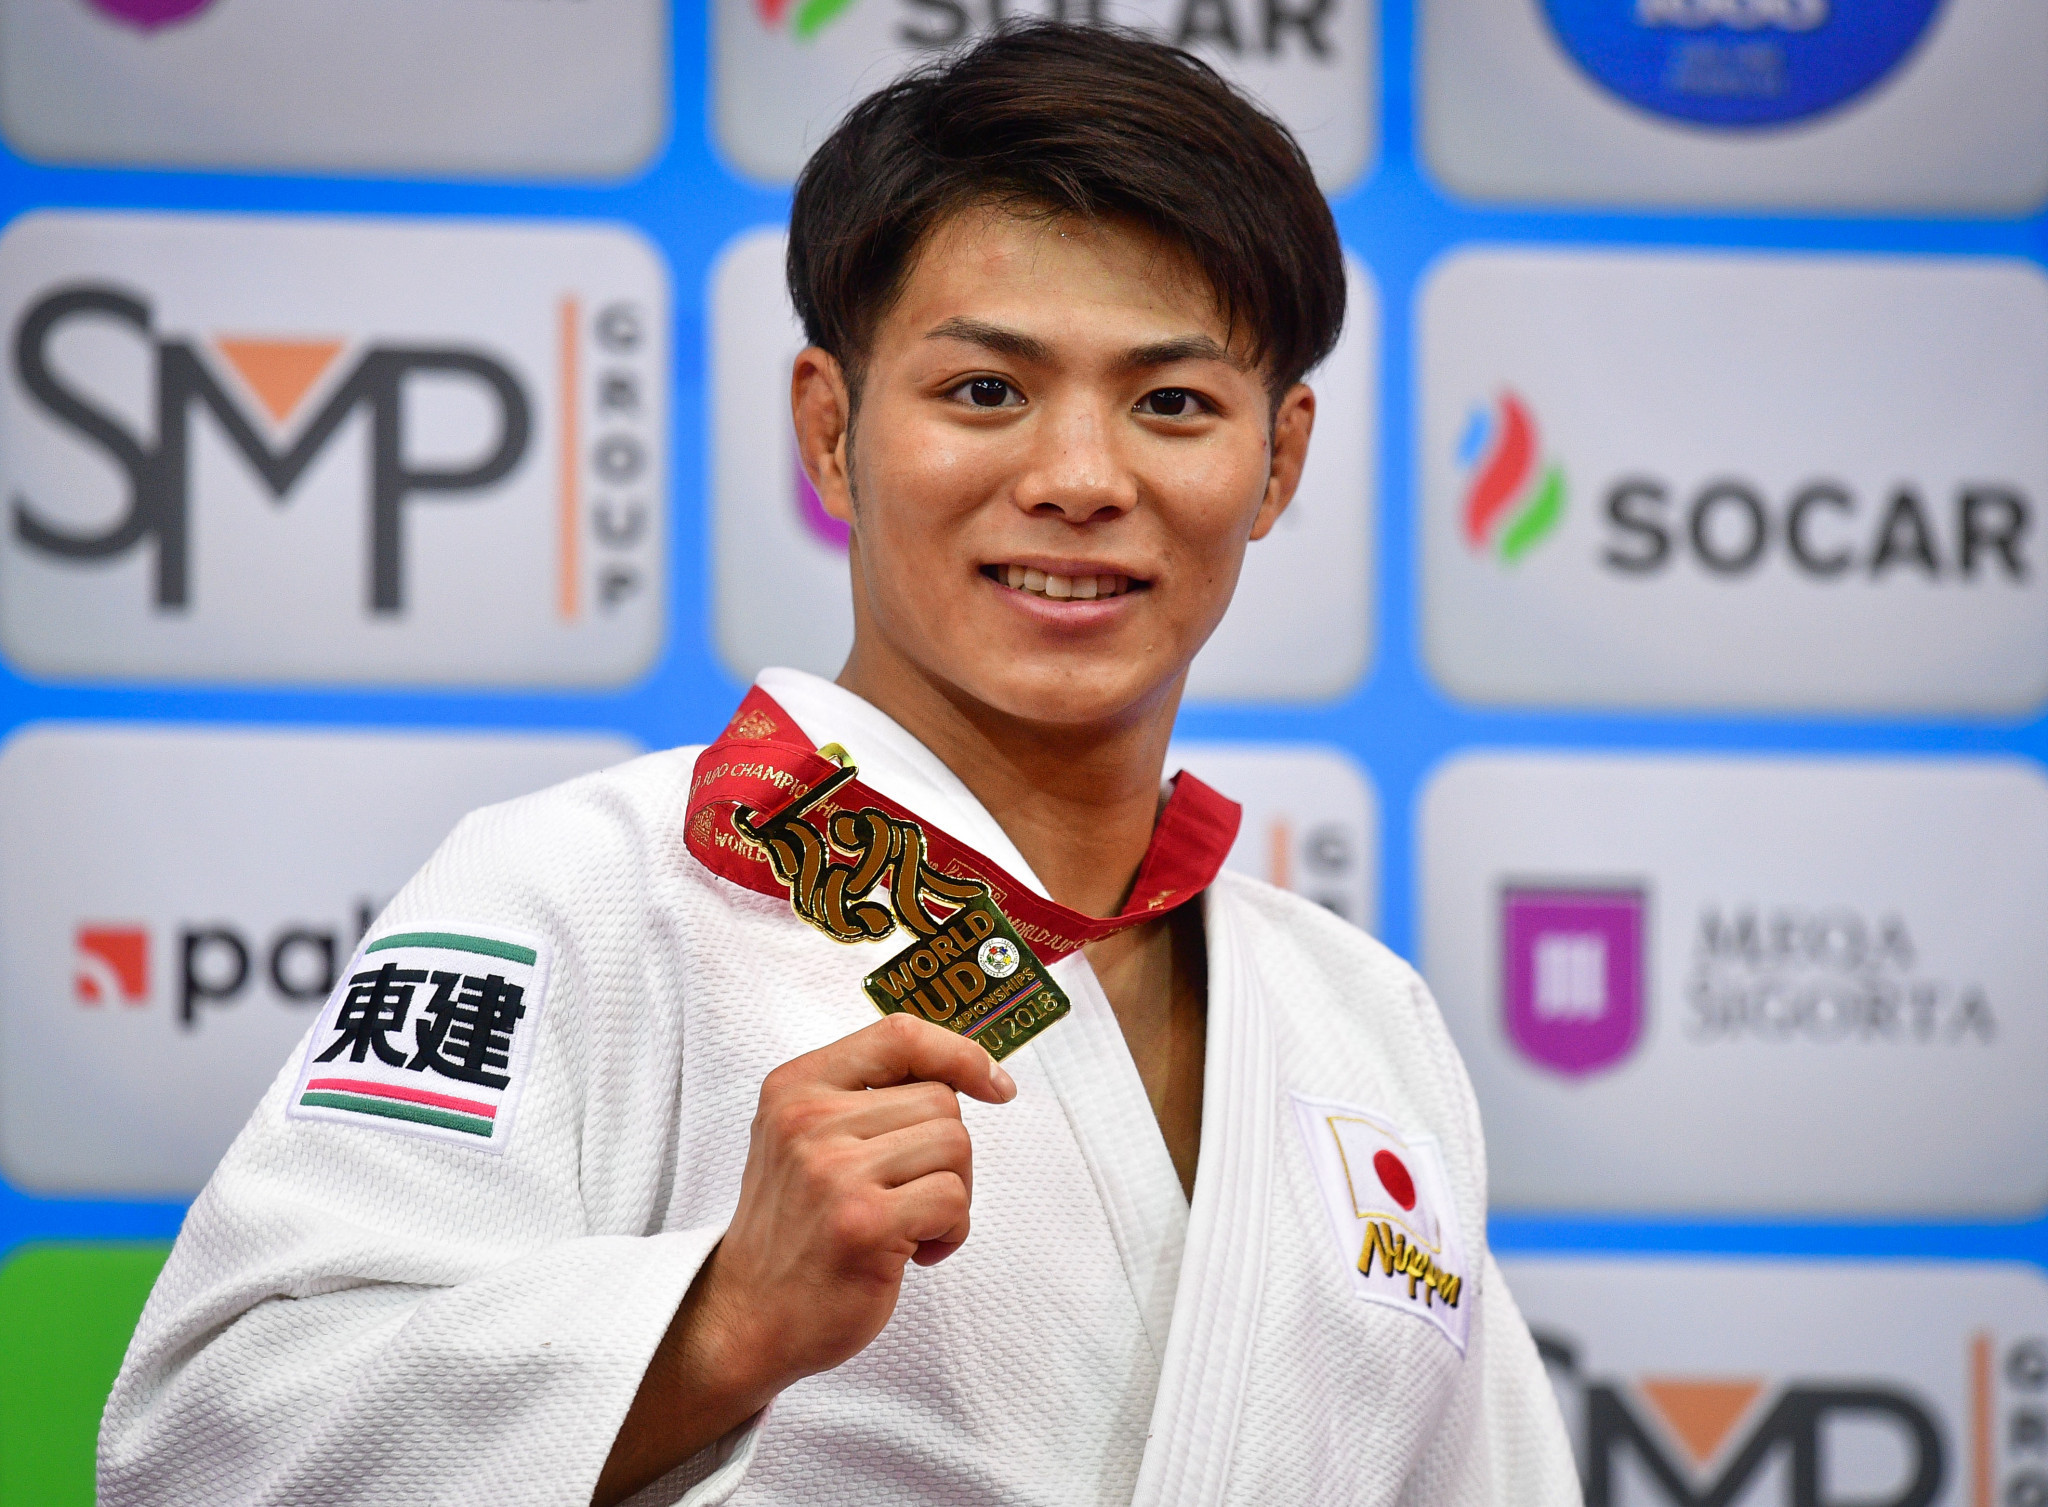 In the men's under-66kg category, Hifumi Abe successfully defended his title ©Getty Images